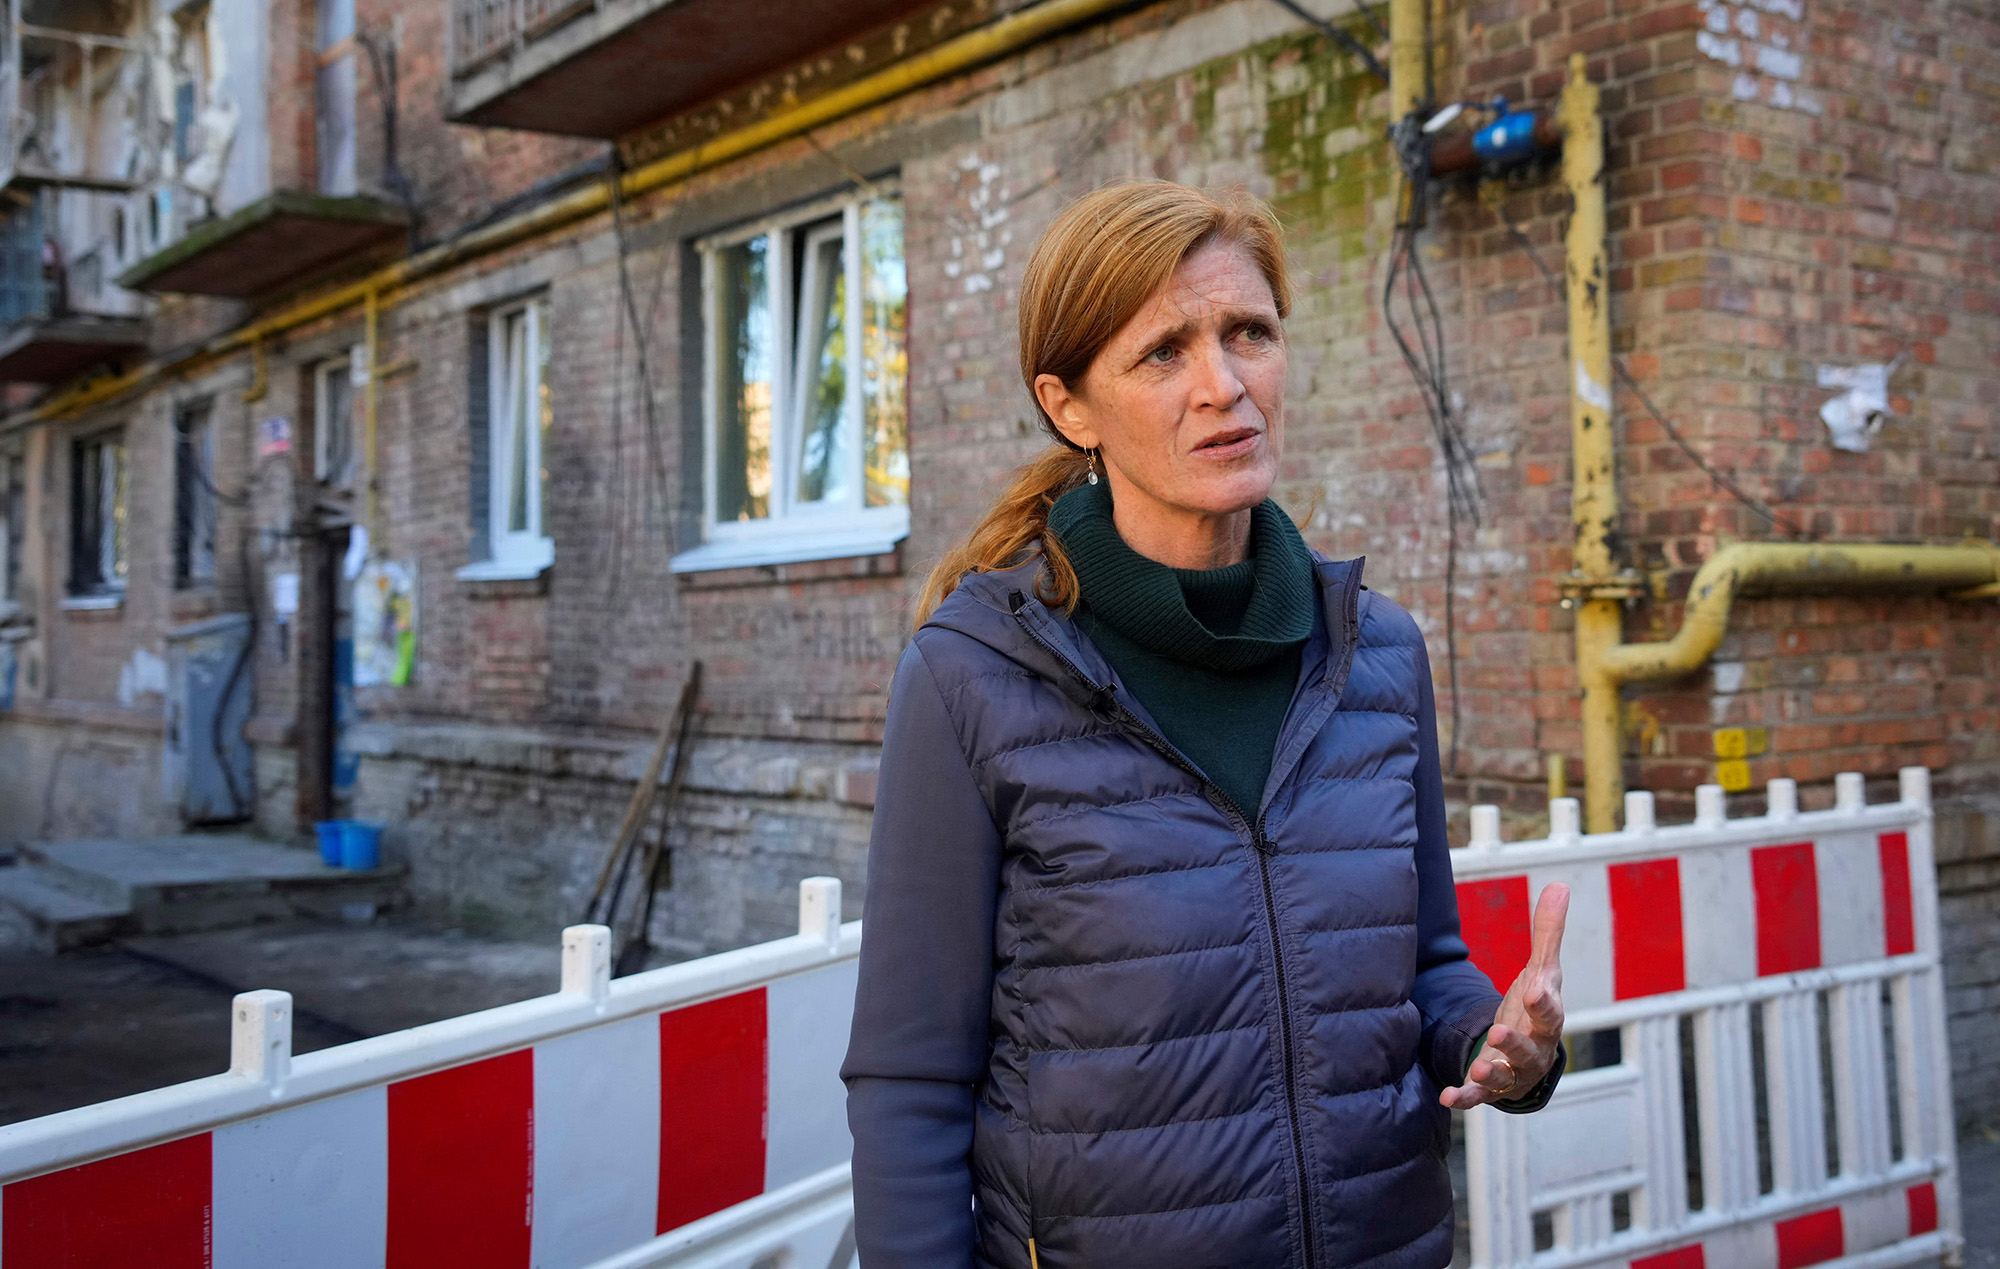 Head of the U.S. Agency for International Development (USAID) Samantha Power answers journalists' questions as she visits Kyiv on October 6.